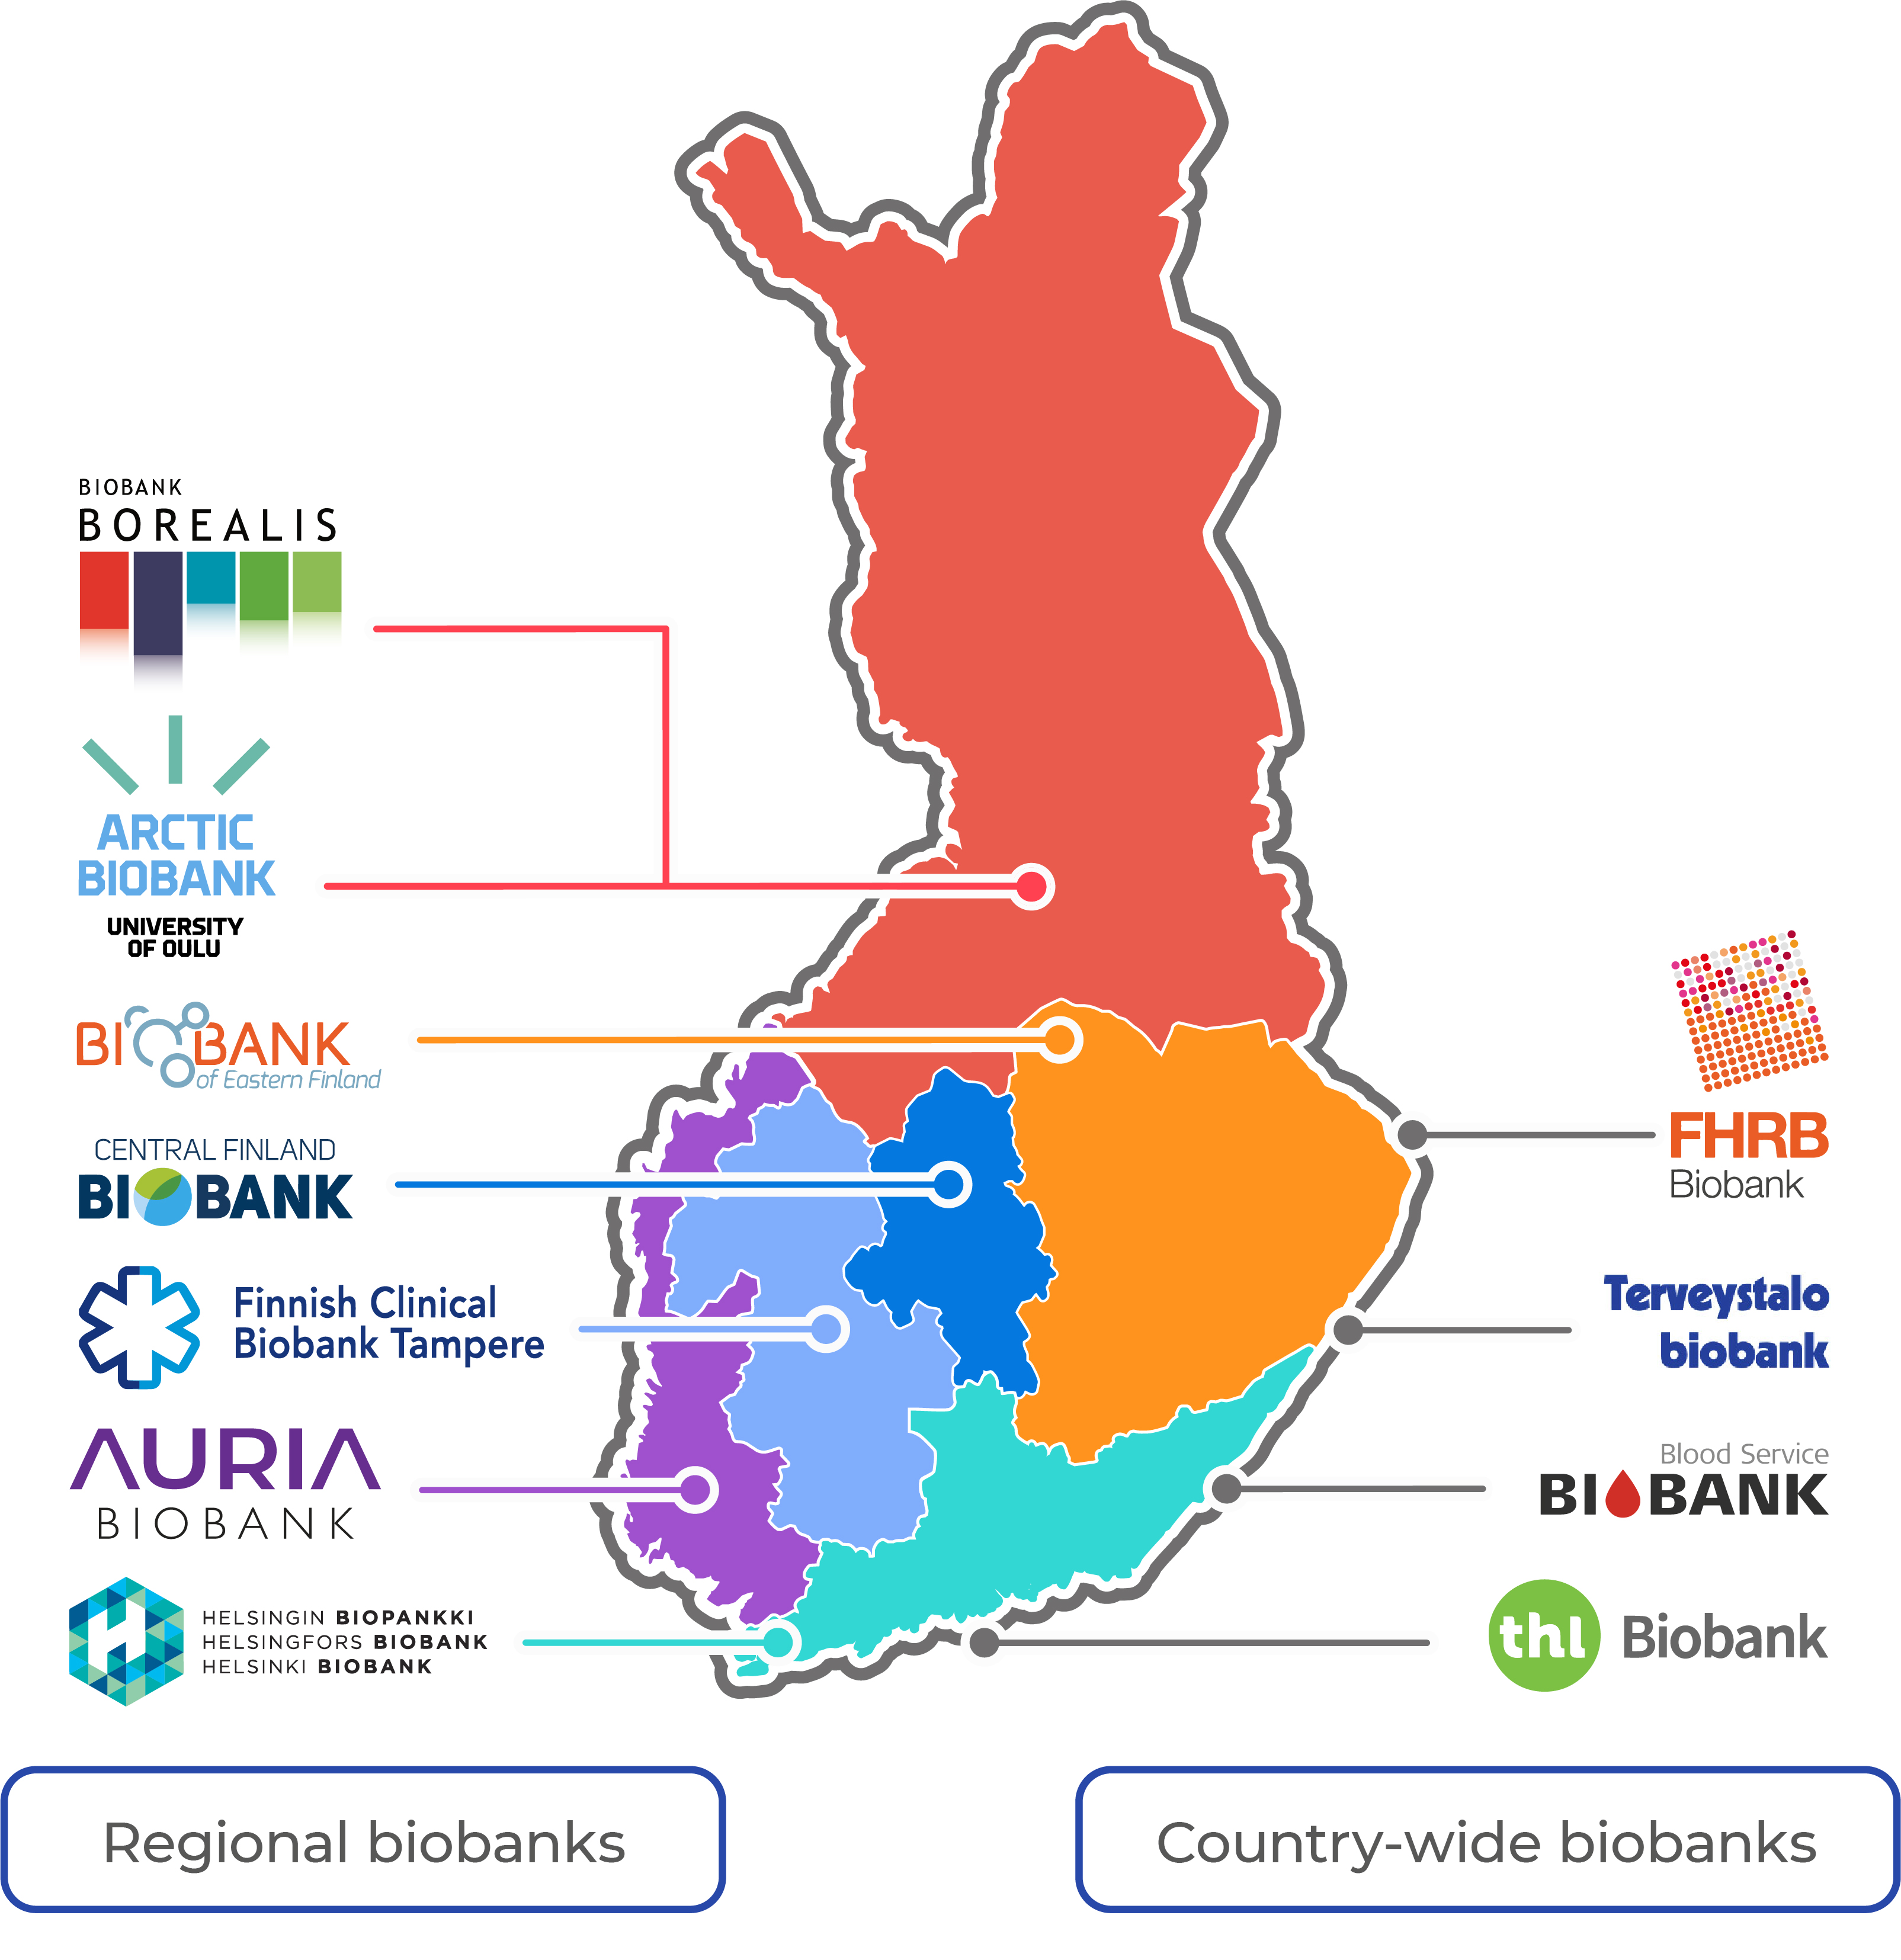 Eleven Finnish biobanks shown on a map, four of which are operating in the whole of Finland, six biobanks in specific hospital district areas and one in the University of Oulu.